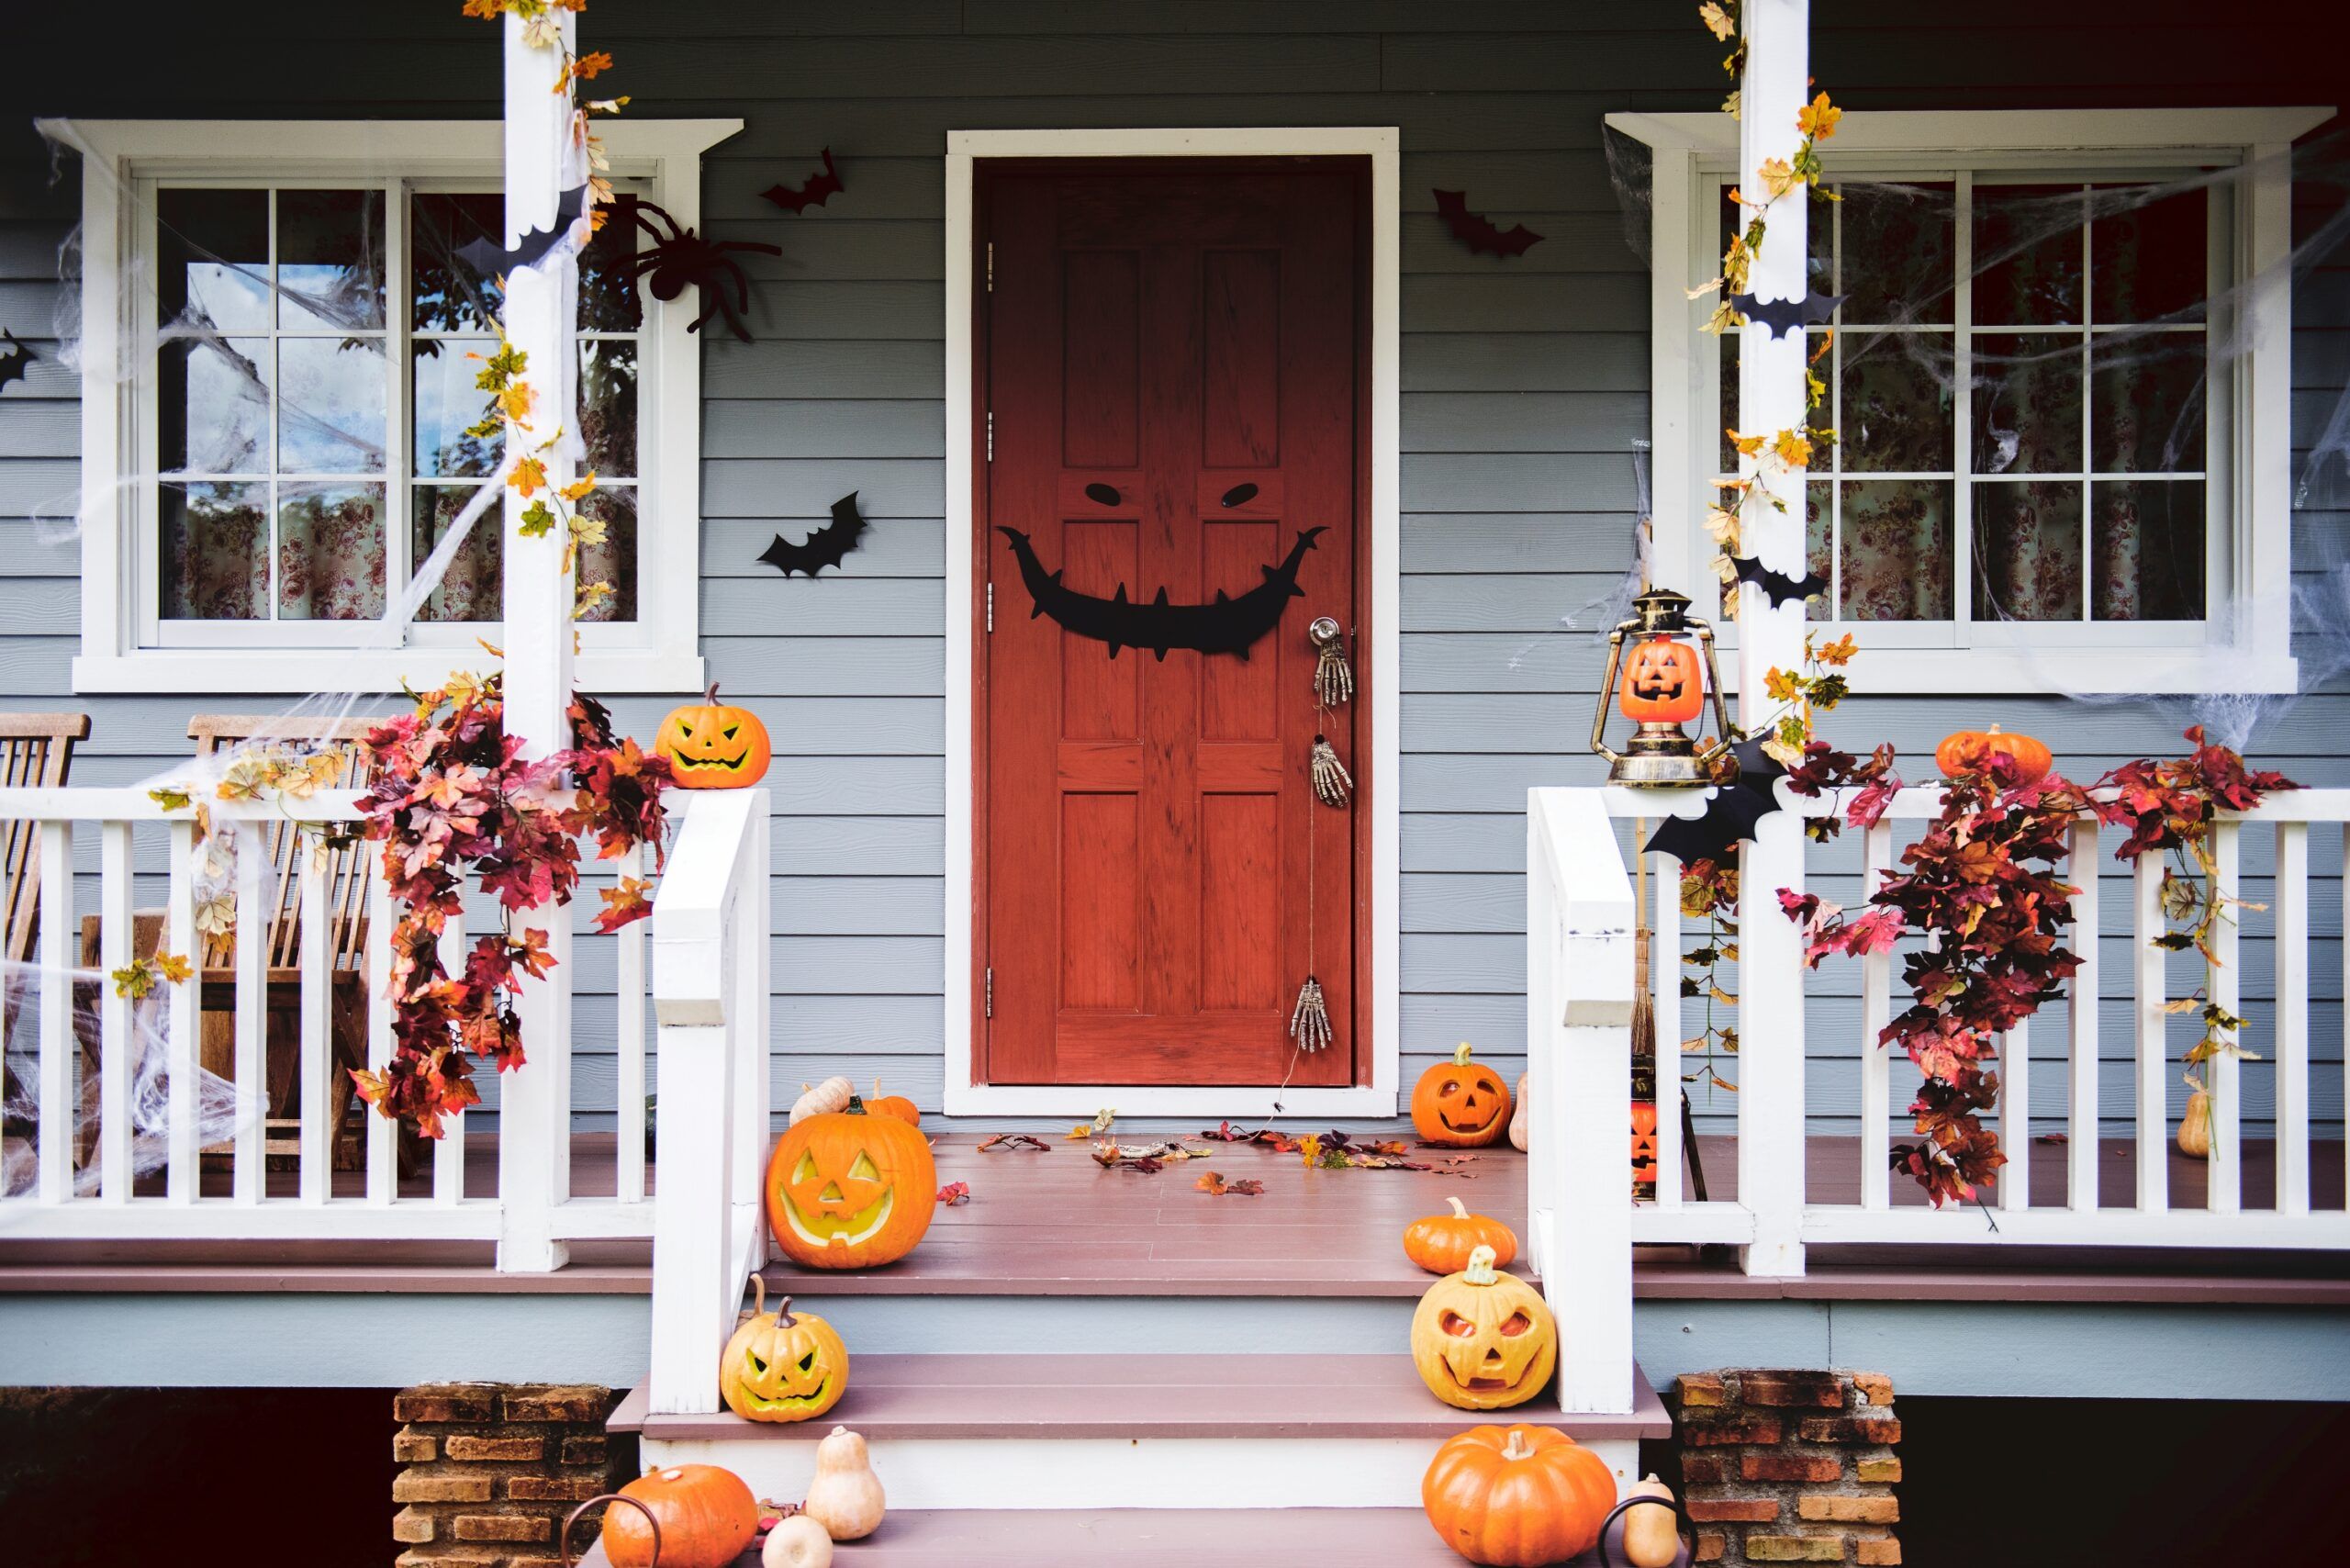 Best Spooky Decor for Halloween - jack-o-lanterns, fall leaves, and other Halloween decorations on front porch of a house